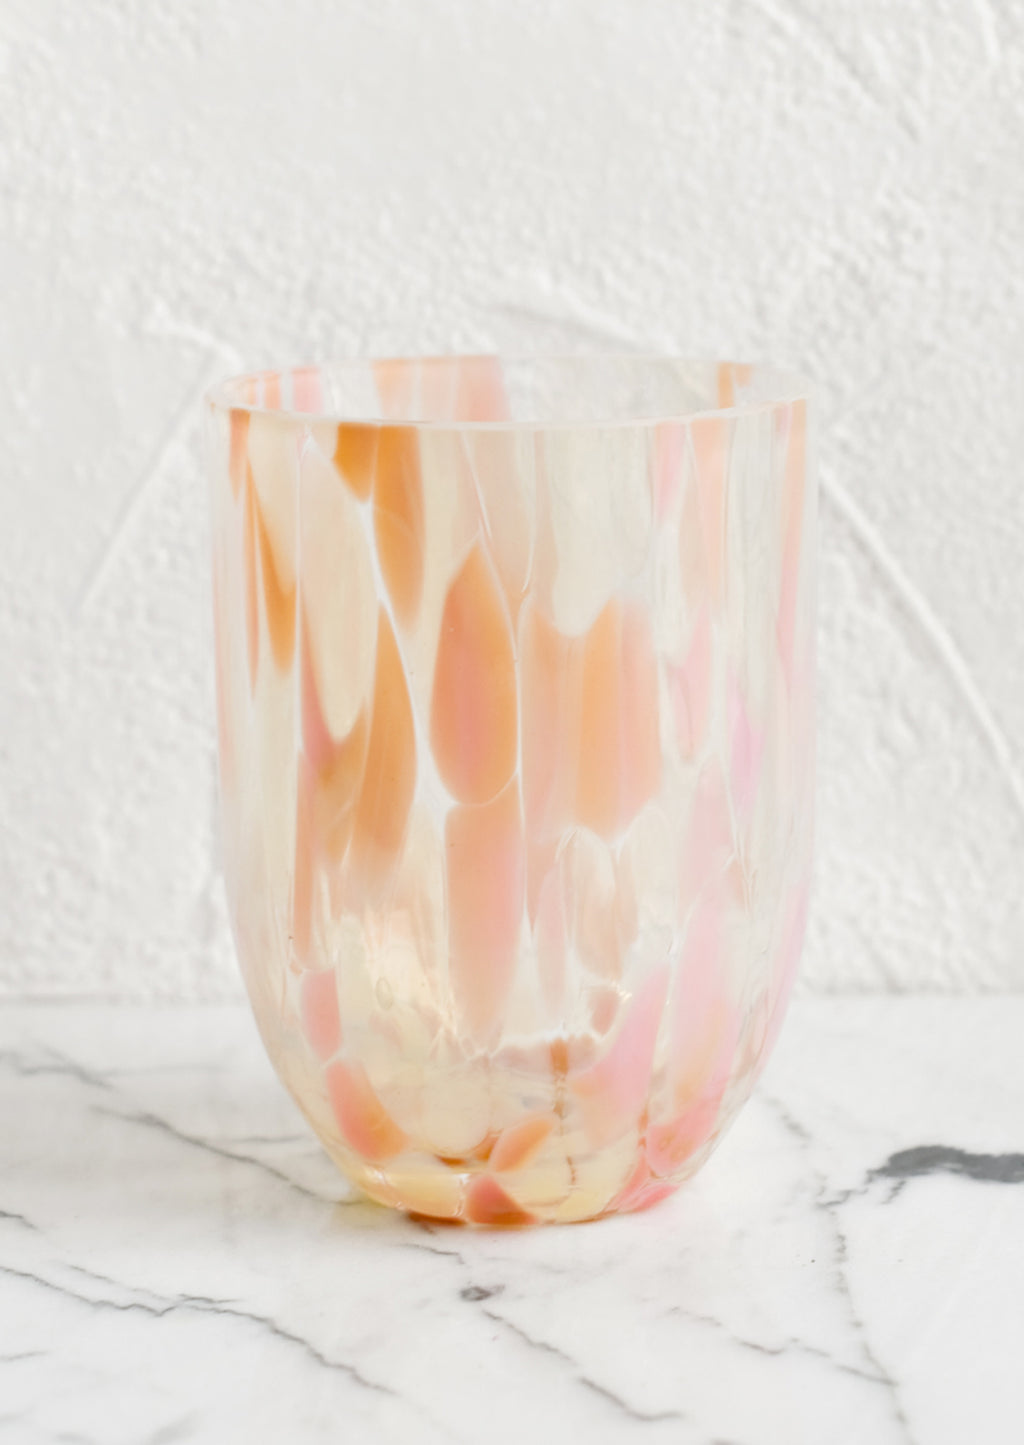 Peach / Sparse: A handmade speckled glass juice cup with peach and pink spots.